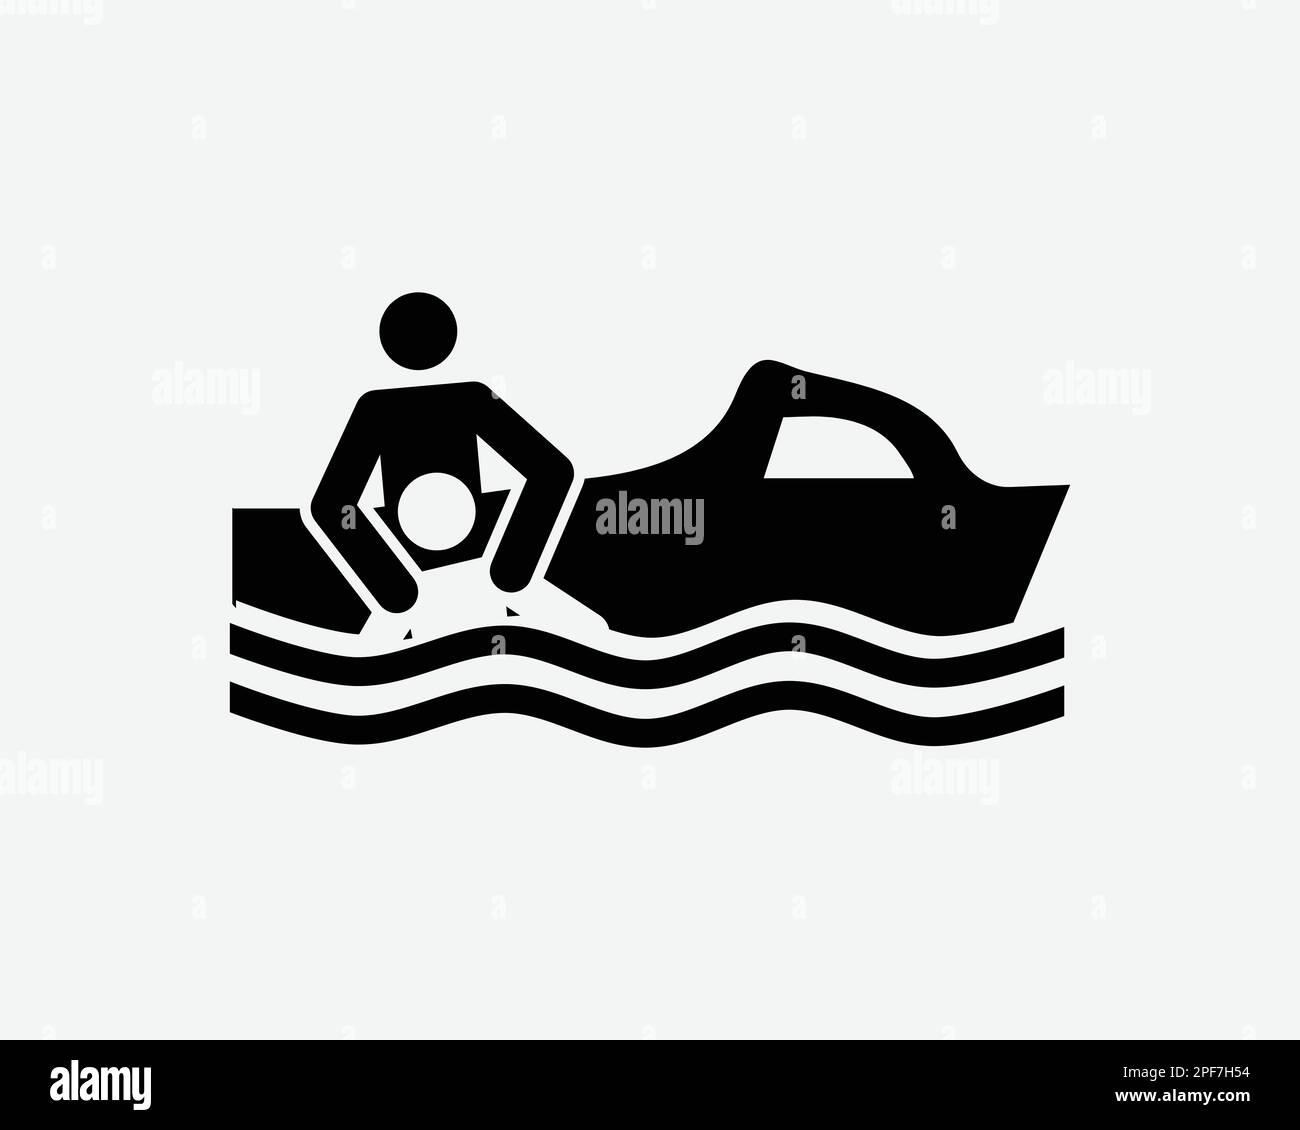 Rescue Boat Lifeboat Emergency Coast Guard Search Speedboat Black White Silhouette Sign Symbol Icon Graphic Clipart Artwork Illustration Pictogram Vec Stock Vector